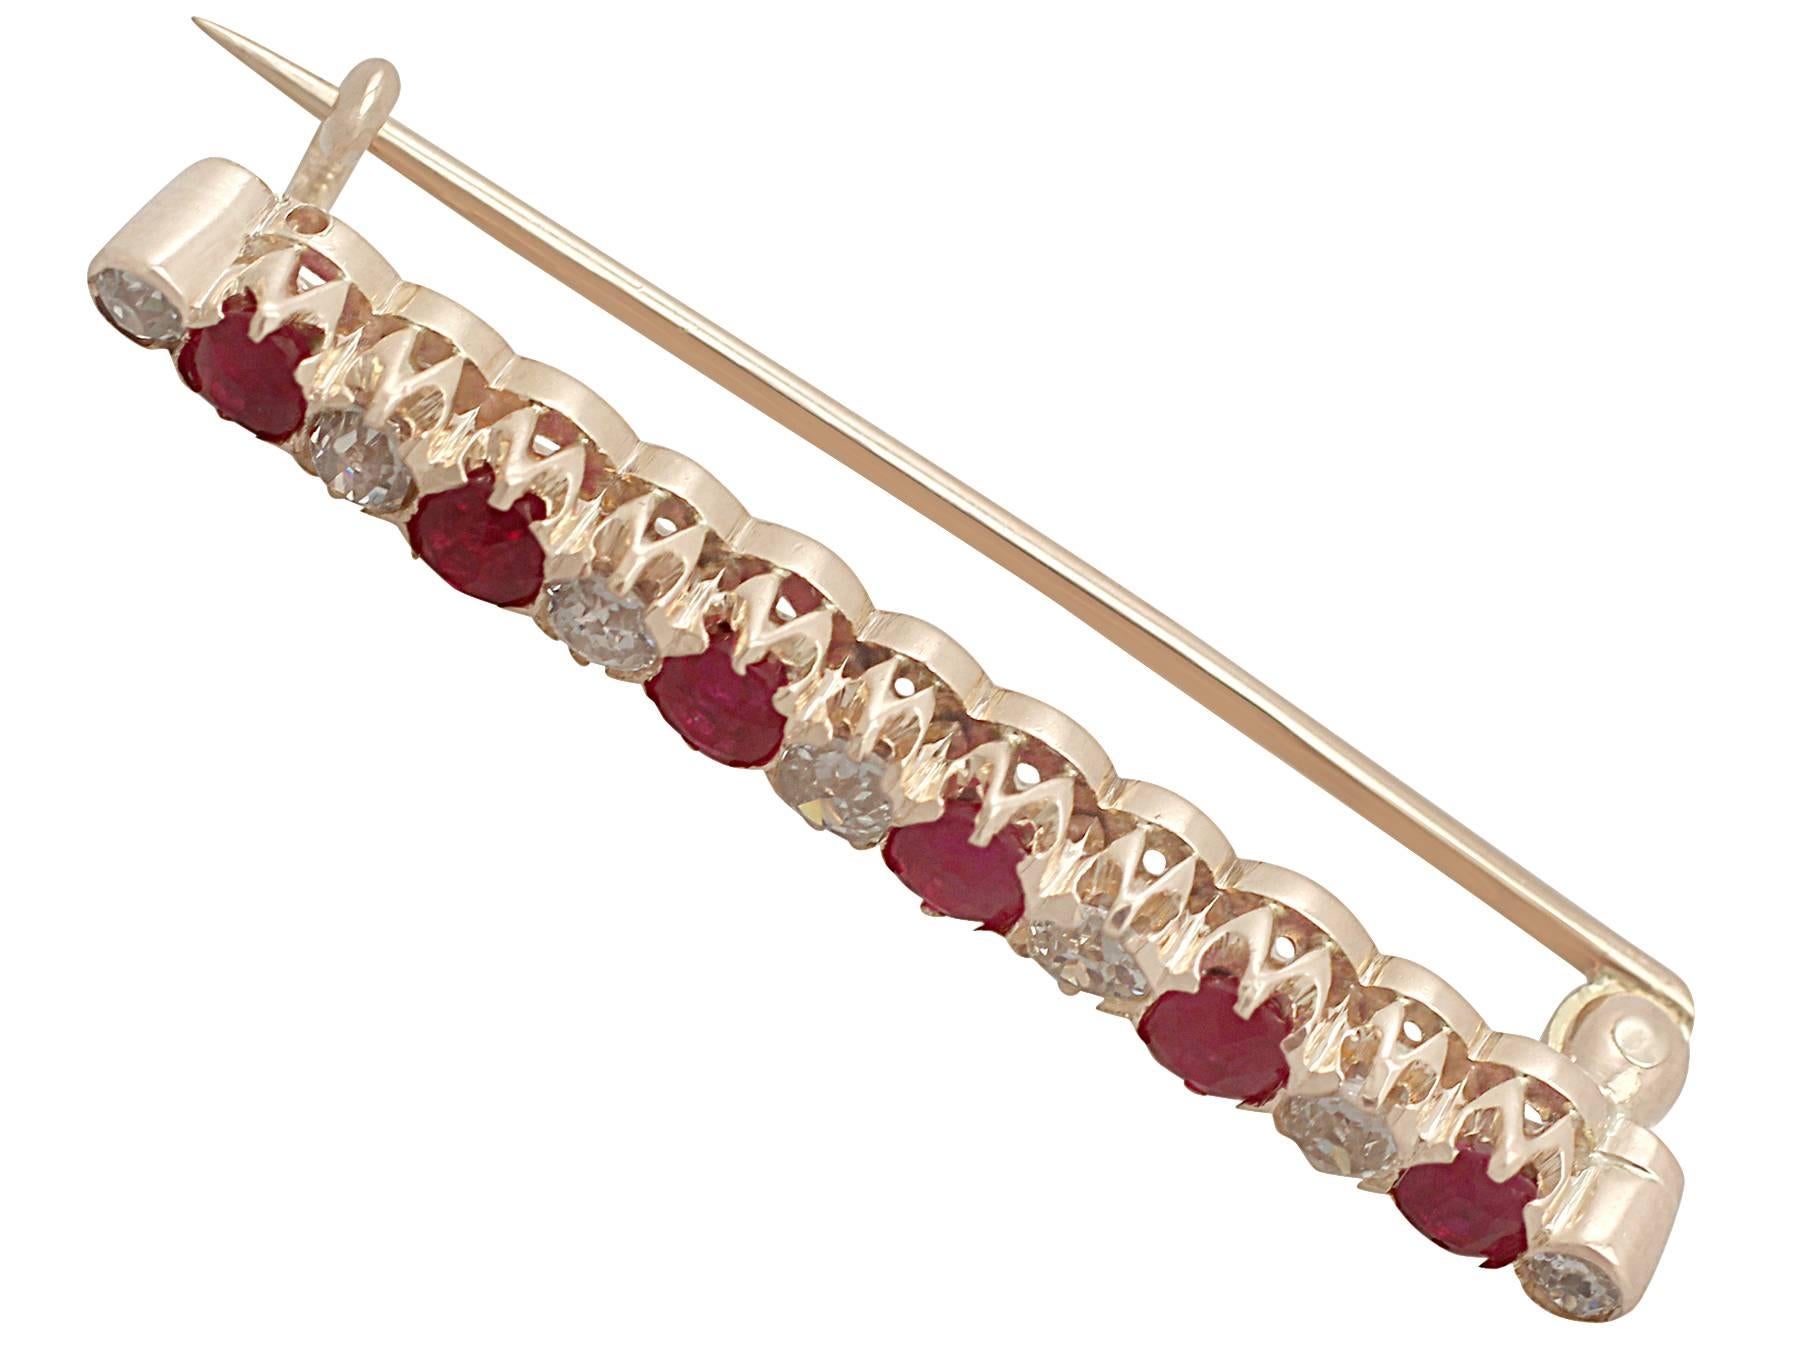 A fine and impressive antique 1.48 carat natural ruby and 0.85 carat diamond and 14 karat rose gold bar brooch; part of our gemstone jewelry and estate jewelry collections

This fine and impressive ruby and diamond brooch has been crafted in 14k